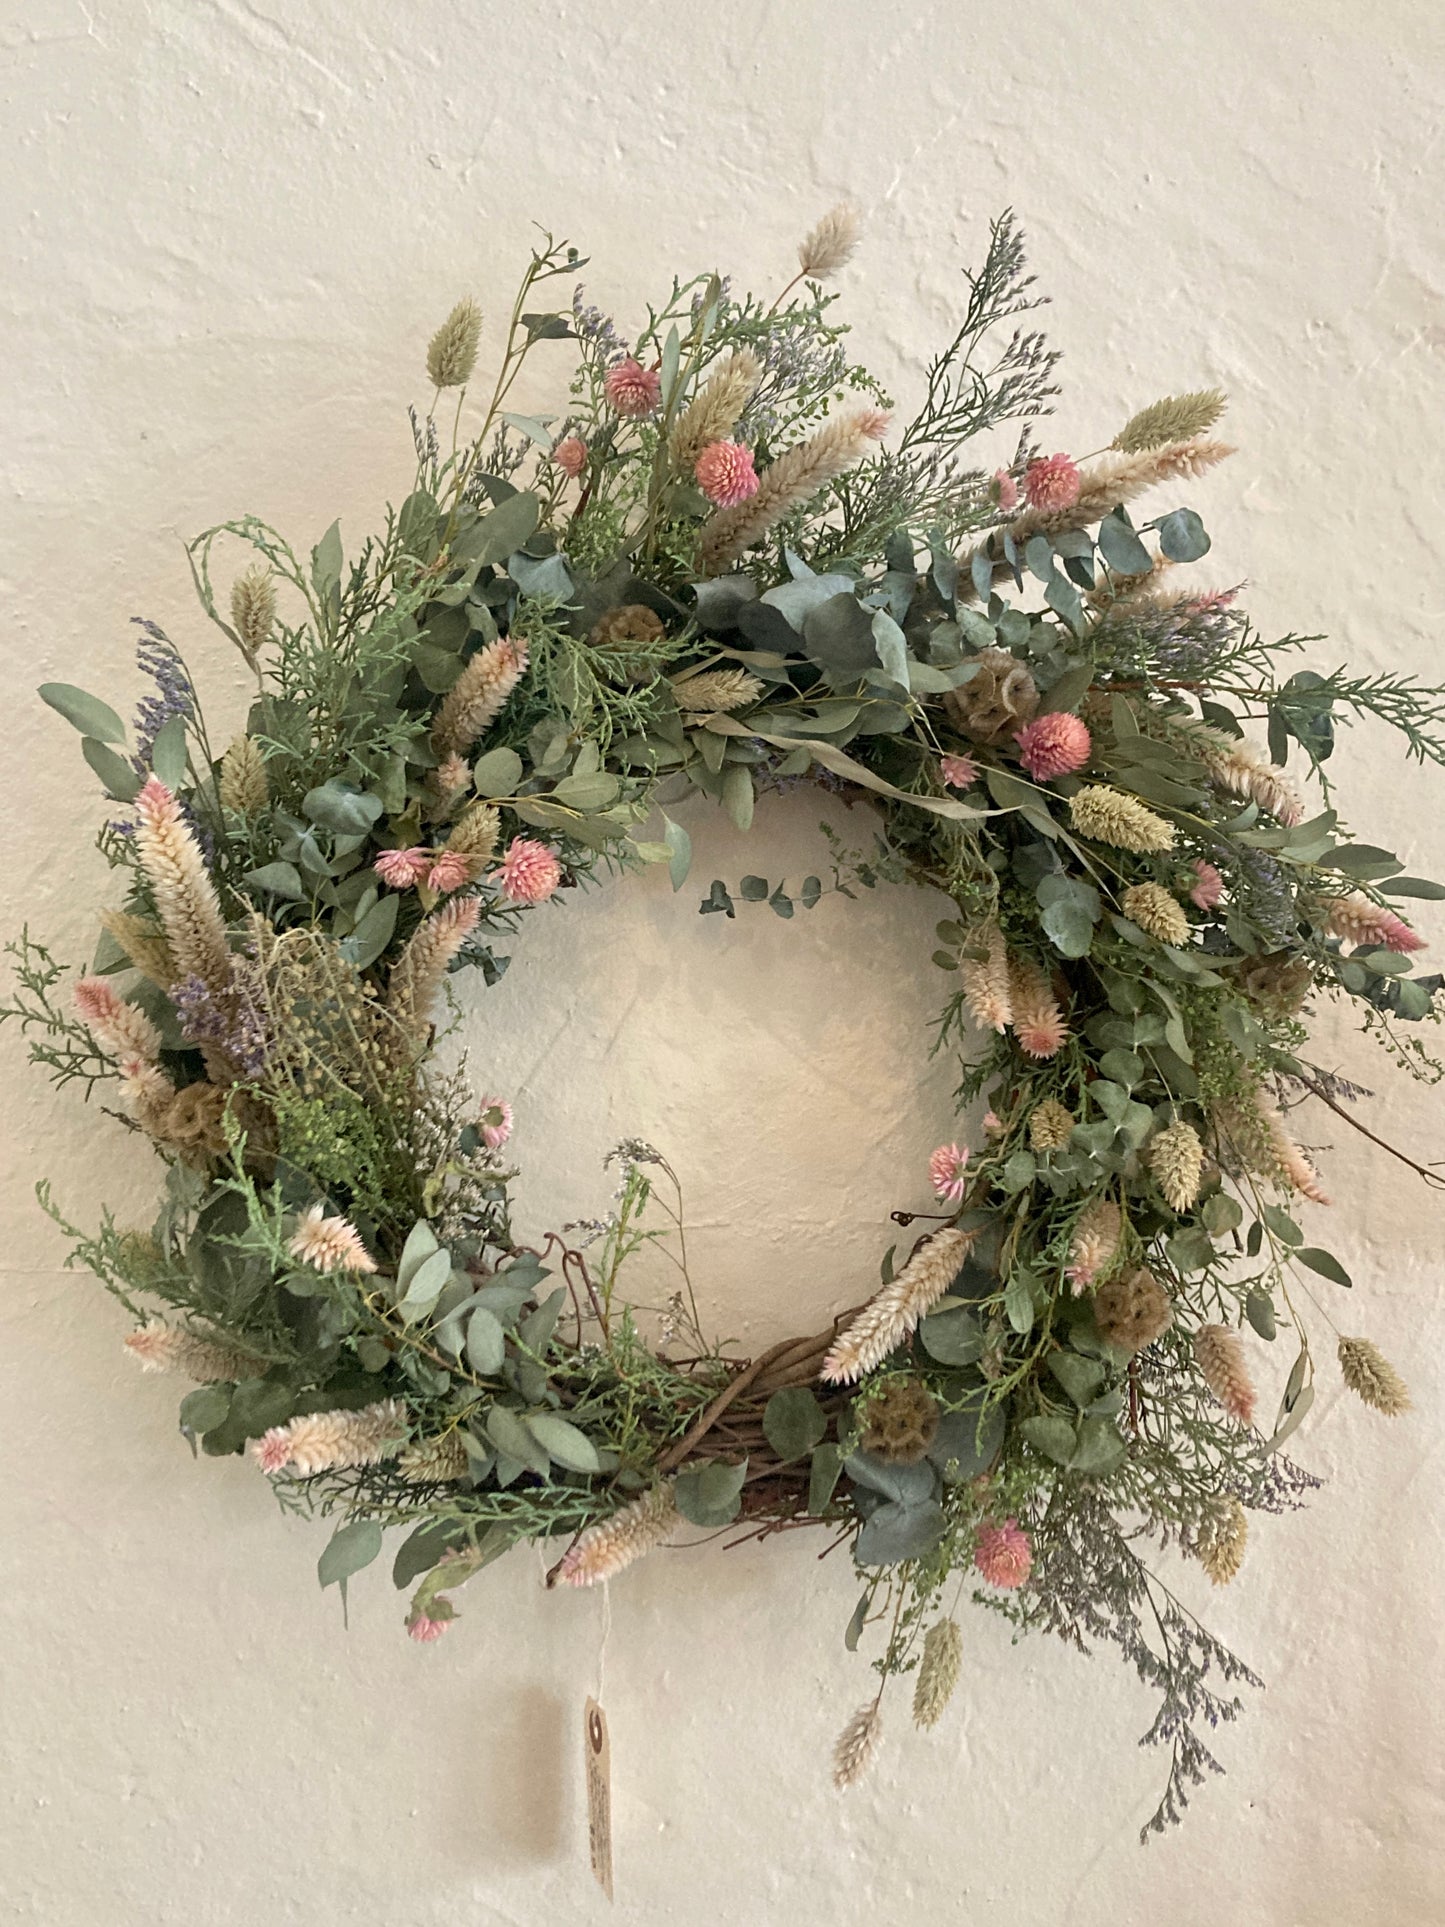 18" pale pink flowers with eucalyptus wreath